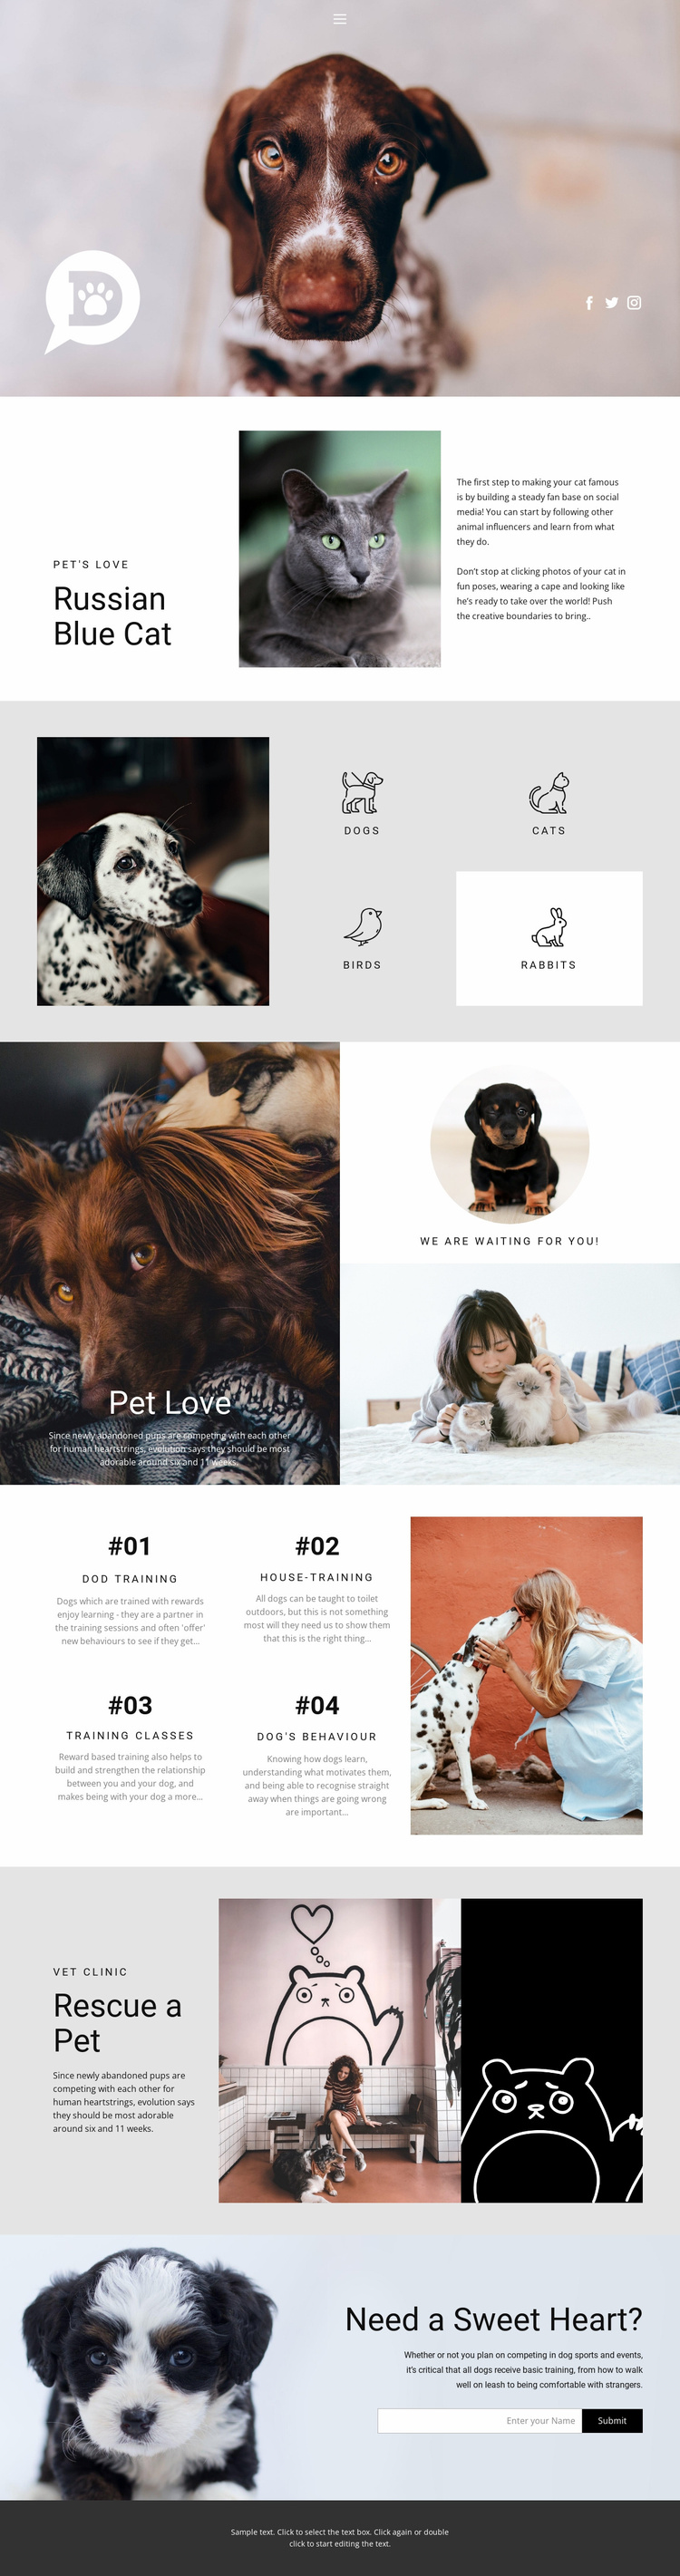 Care for pets and animals Website Template